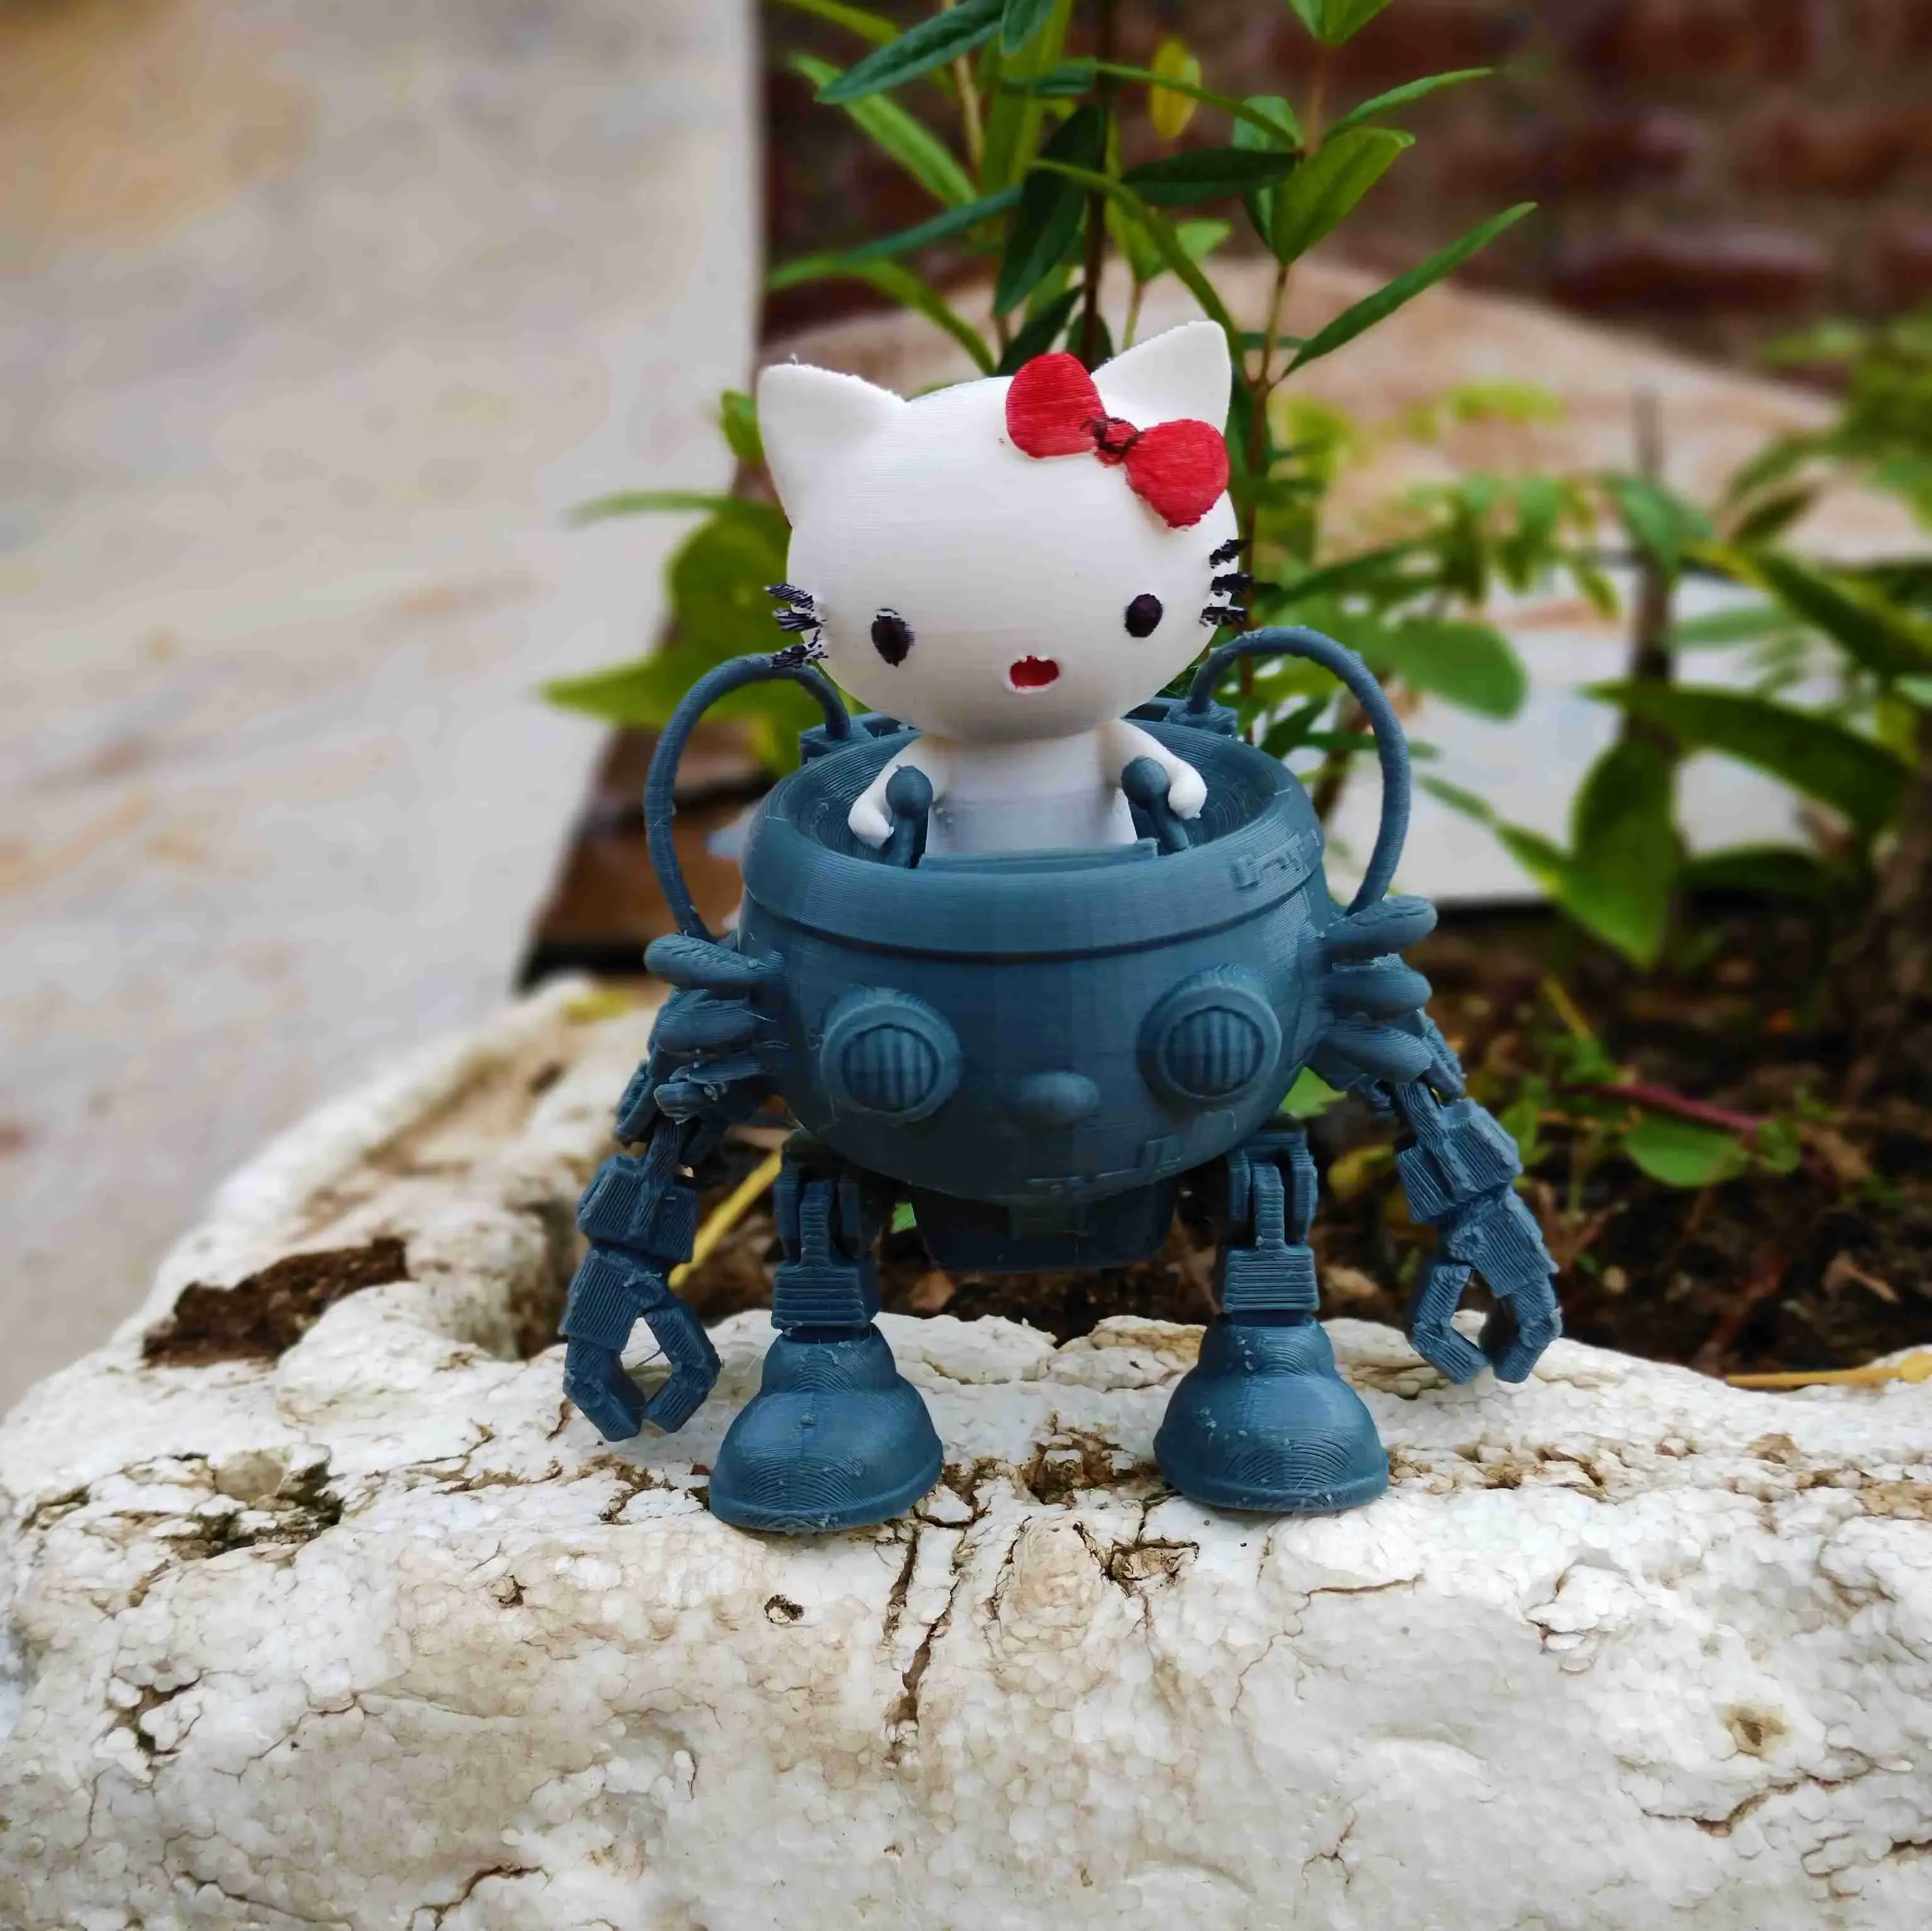 HELLO KITTY BOT, A ROBOT PILOTED BY AN ADORABLE HELLO KITTY